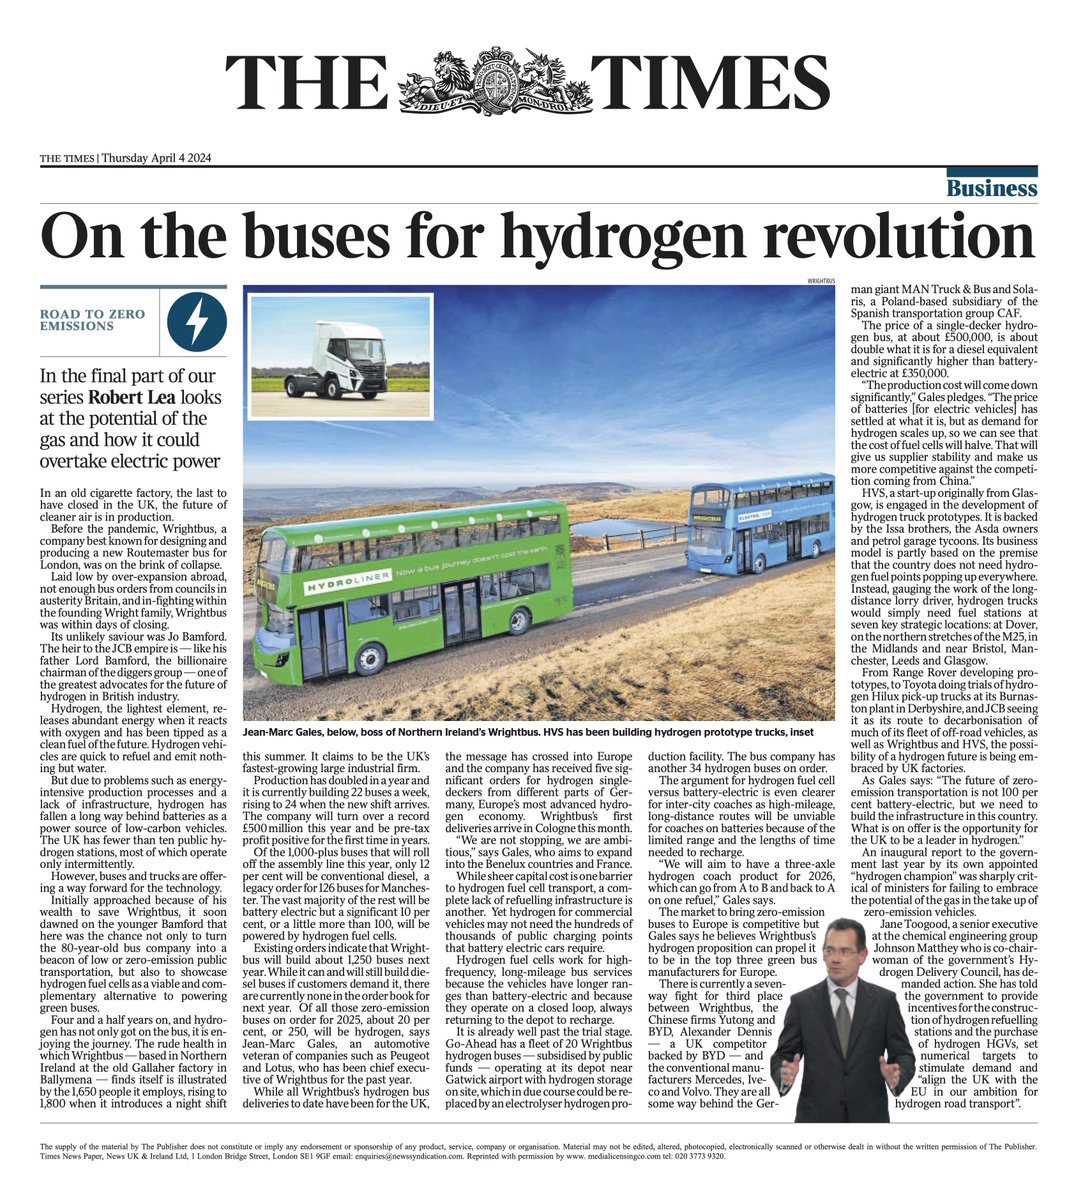 .@Wright_bus CEO Jean-Marc Gales talks to The Times, sharing the Wrightbus #drivingagreenerfuture story “We are not stopping. We are ambitious” Read more: wrightbus.com/en-gb/on-the-b… #Wrightbus #DrivingAGreenerFuture #TheTimes #Hydrogen #HydrogenBus #HydrogenEconomy #Decarbonisation